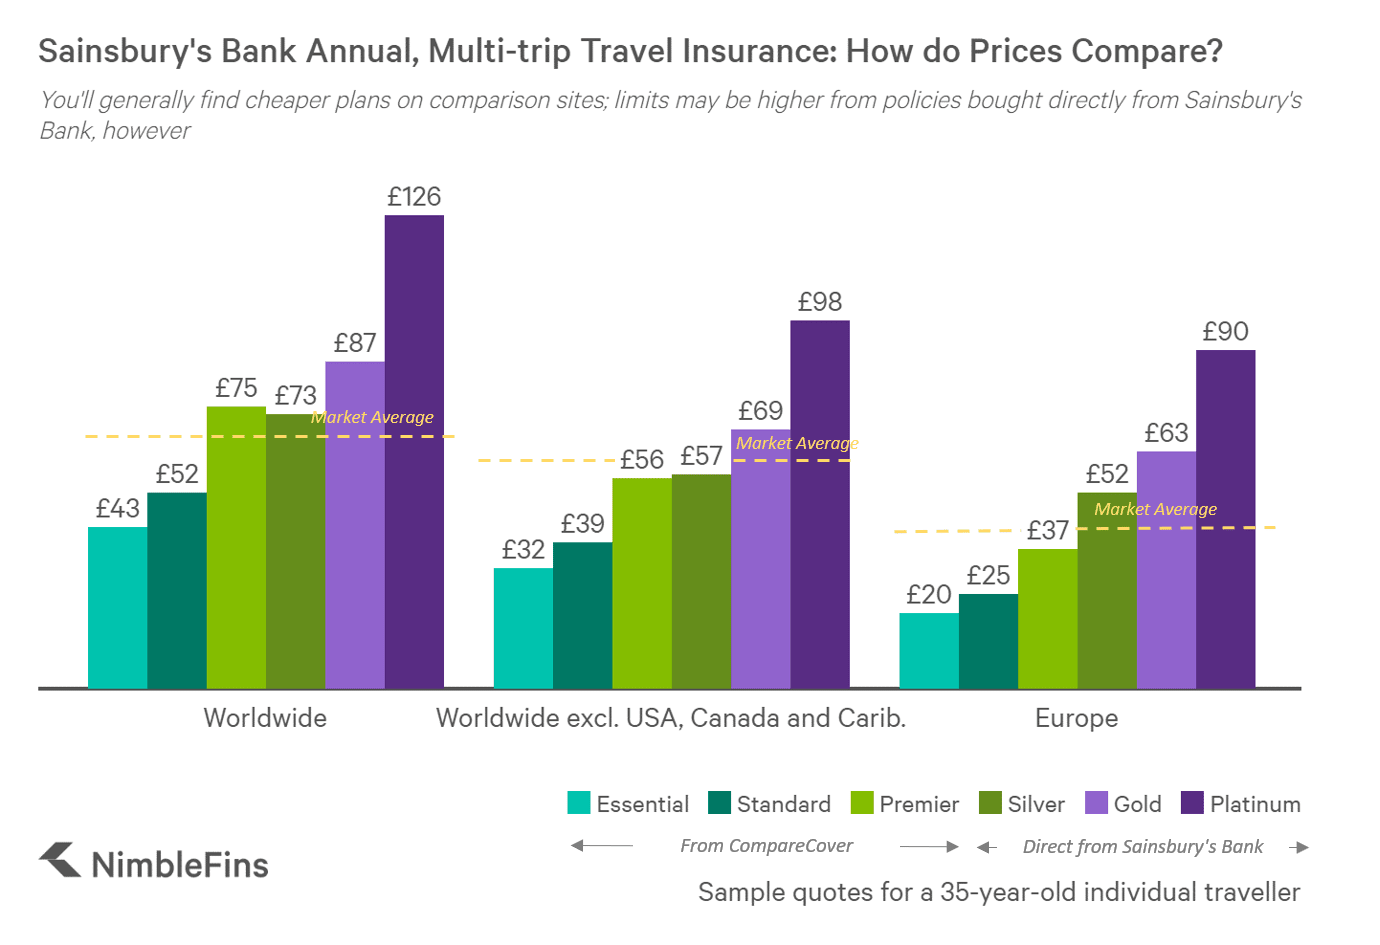 chart showing prices of Virgin Money travel insurance plans compared to the market average